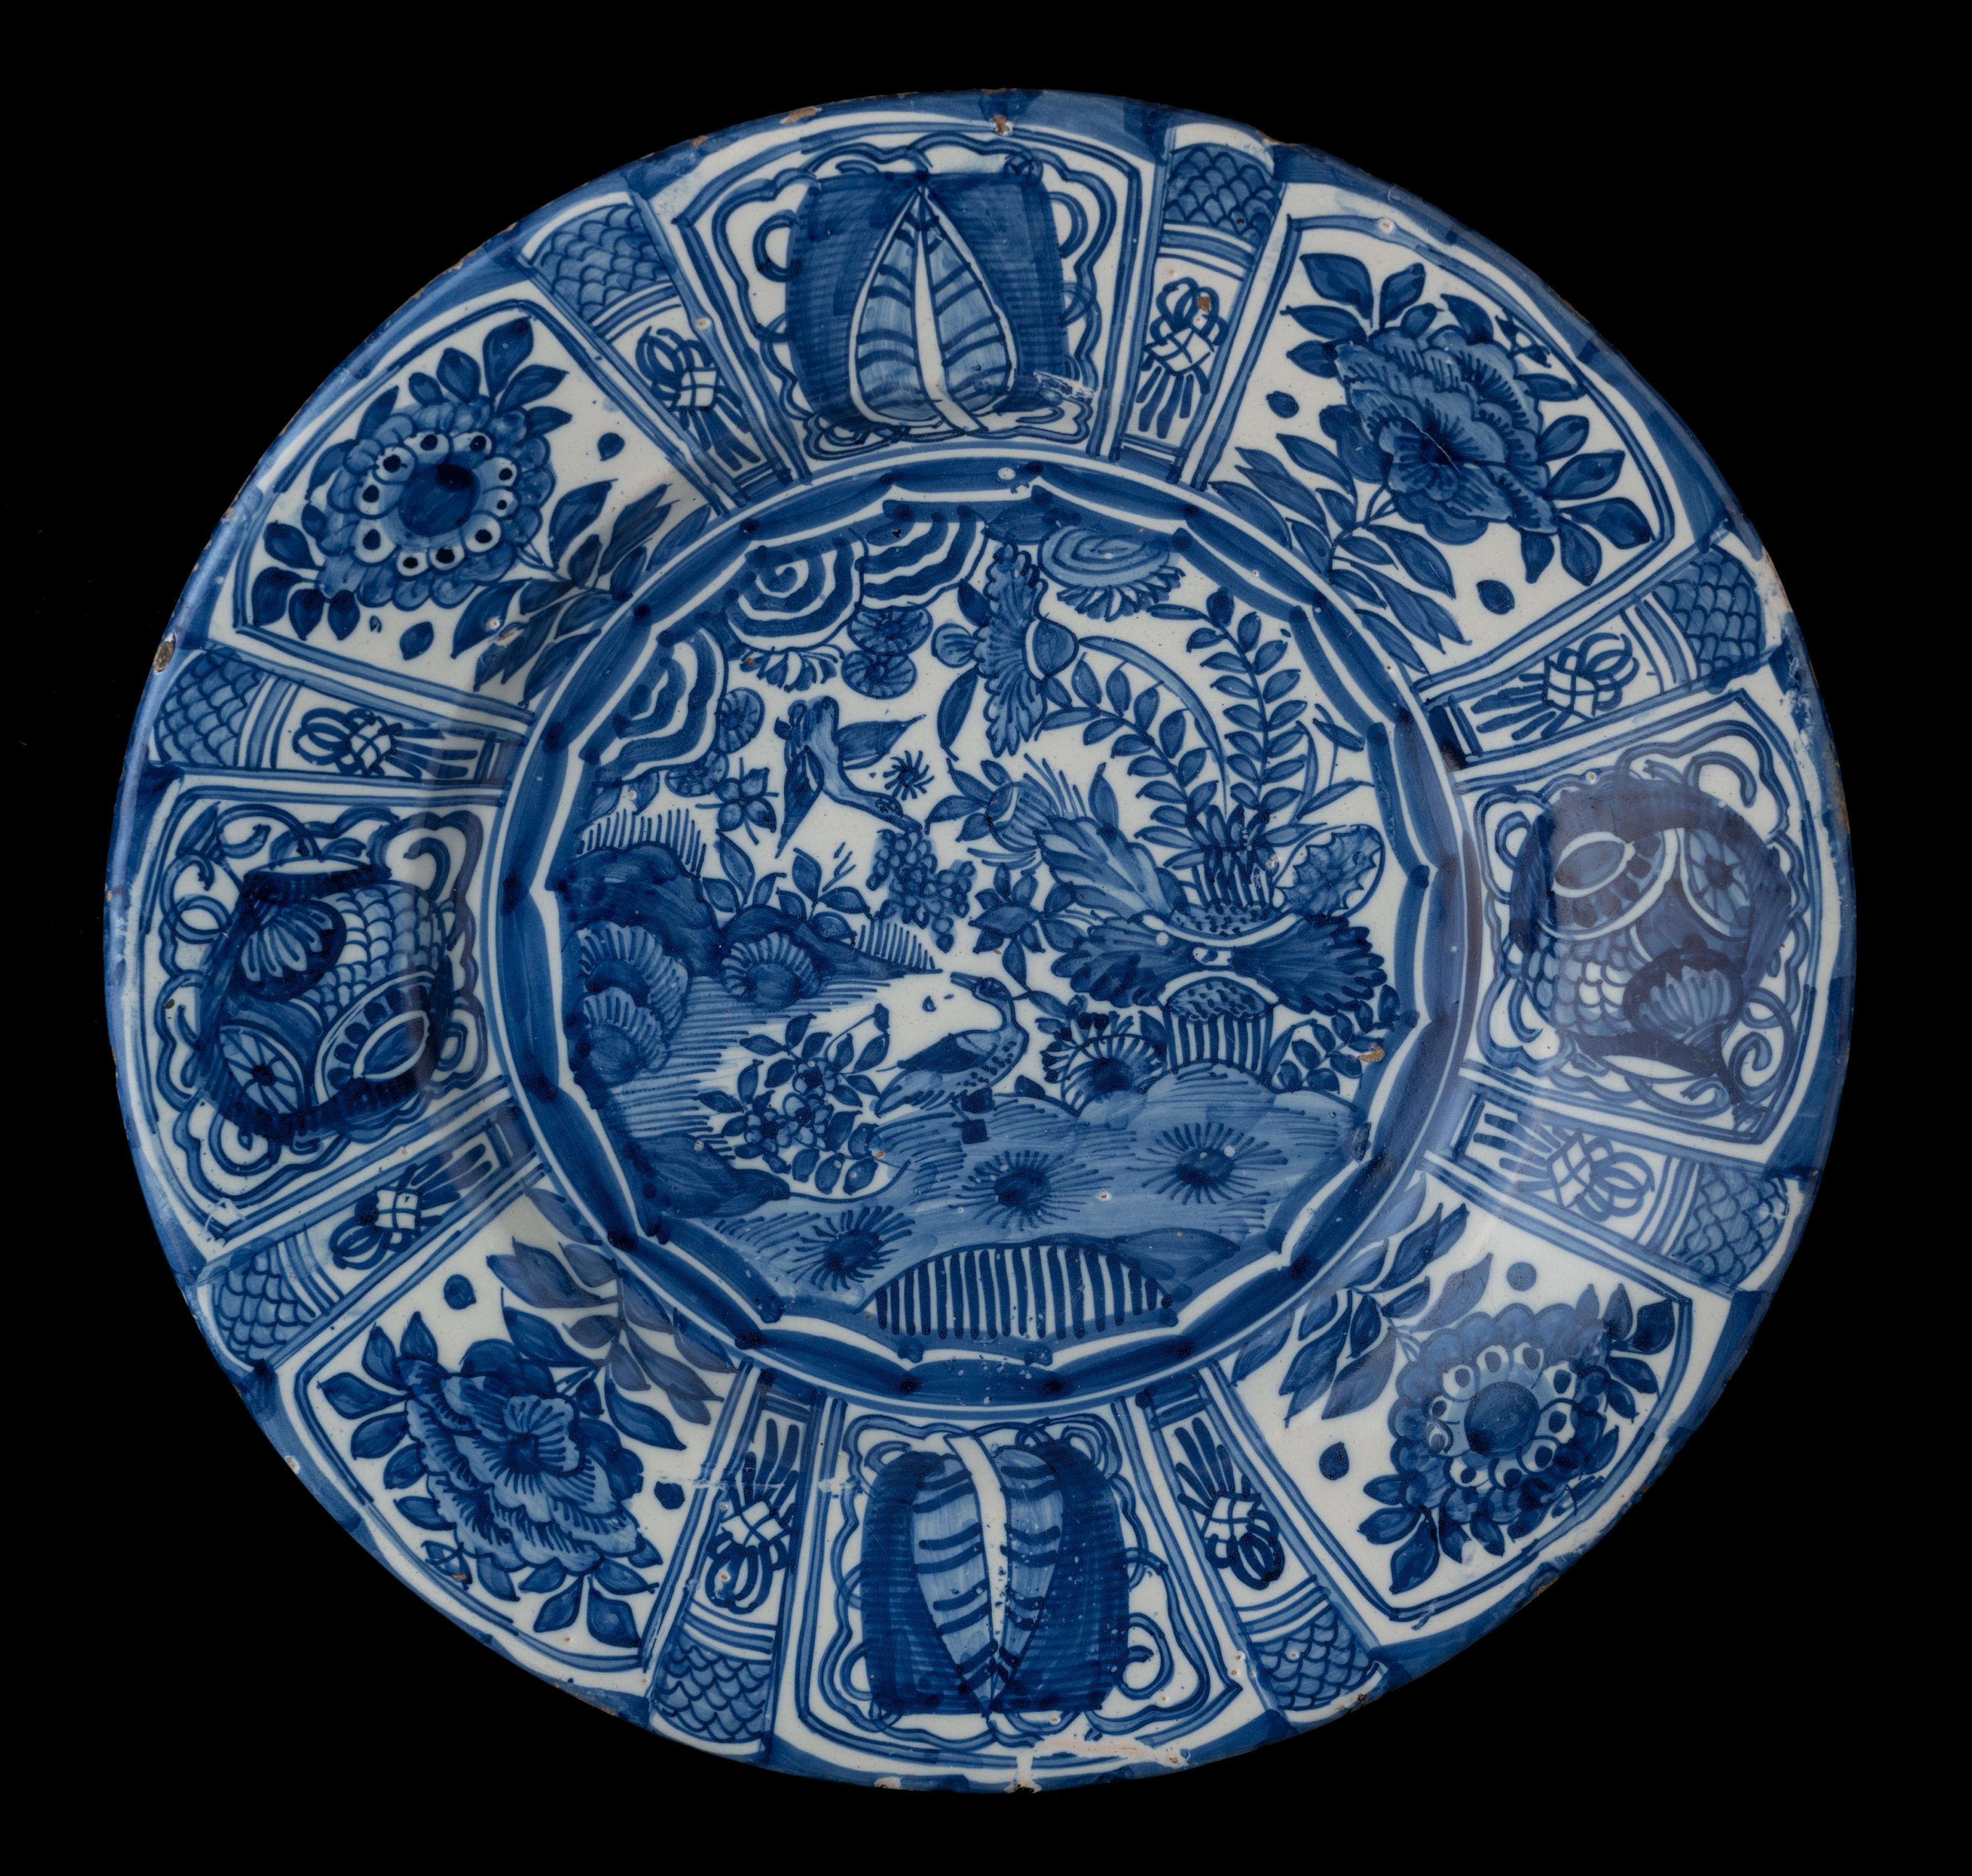 The blue and white dish has a wide, spreading flange and is painted in the centre with a Chinese-style rocky landscape with plants, flowers and birds. The depiction is framed within a polygon shape. The well and flange are divided into eight wide